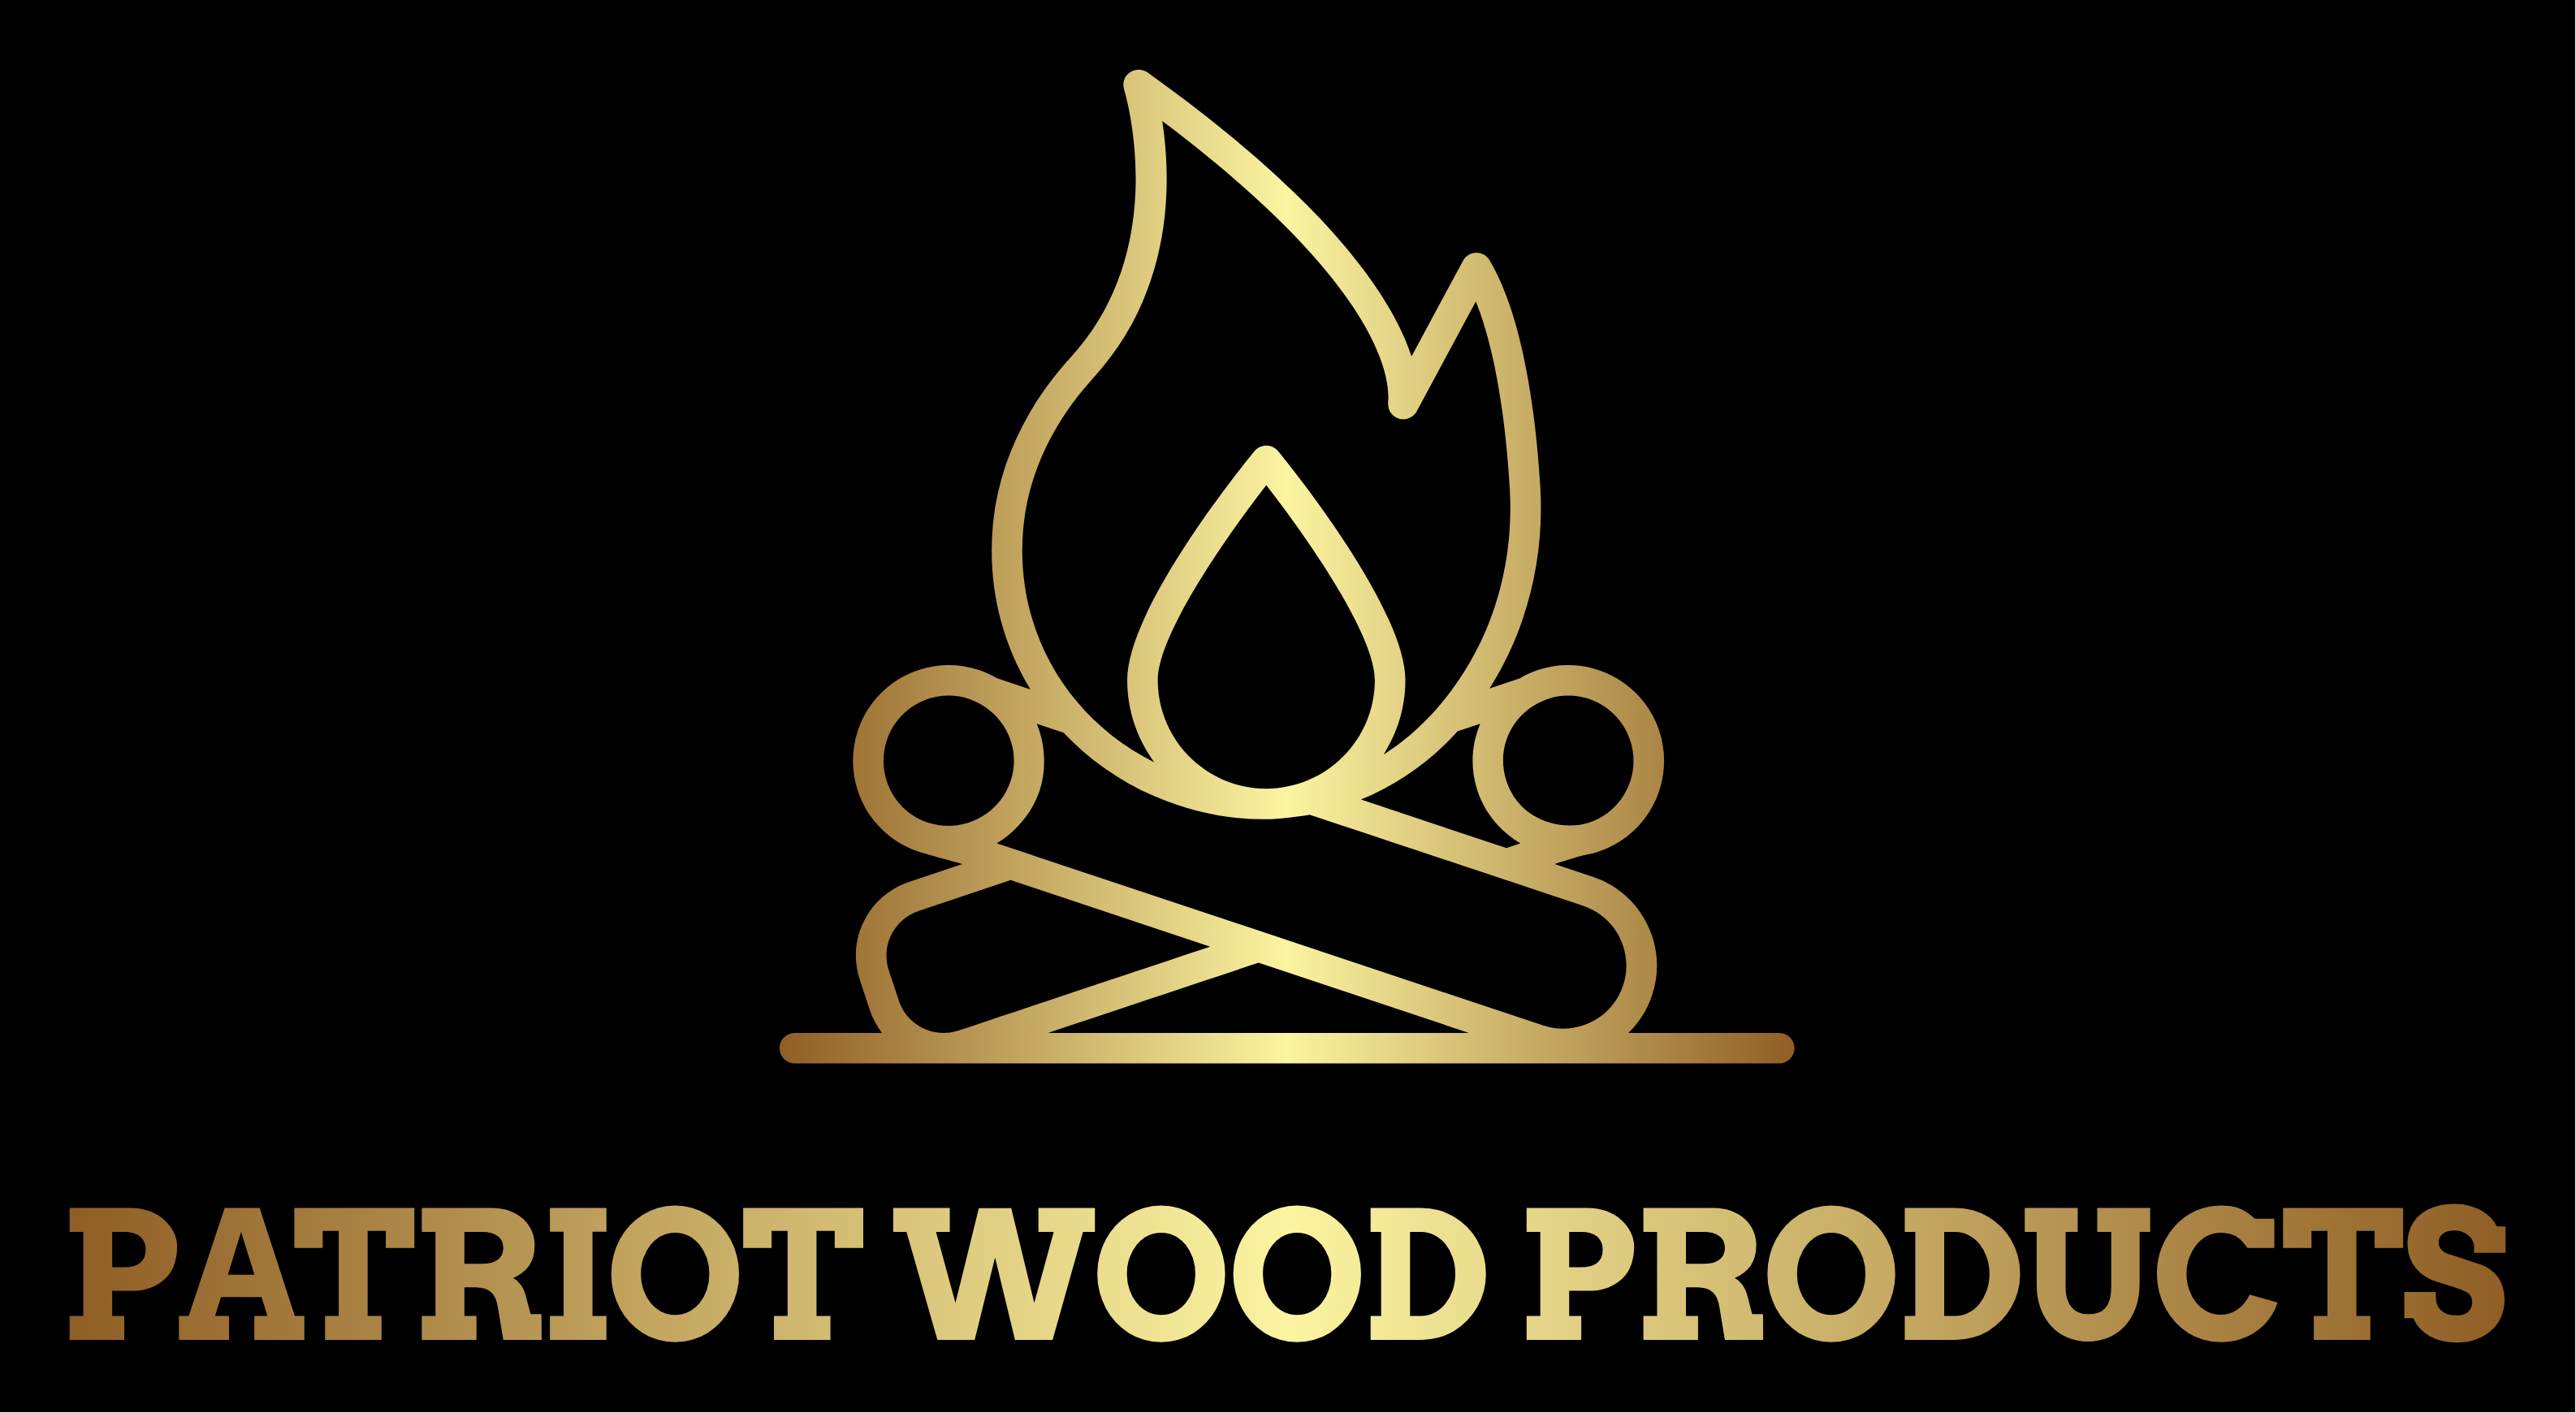 Patriot Wood Products